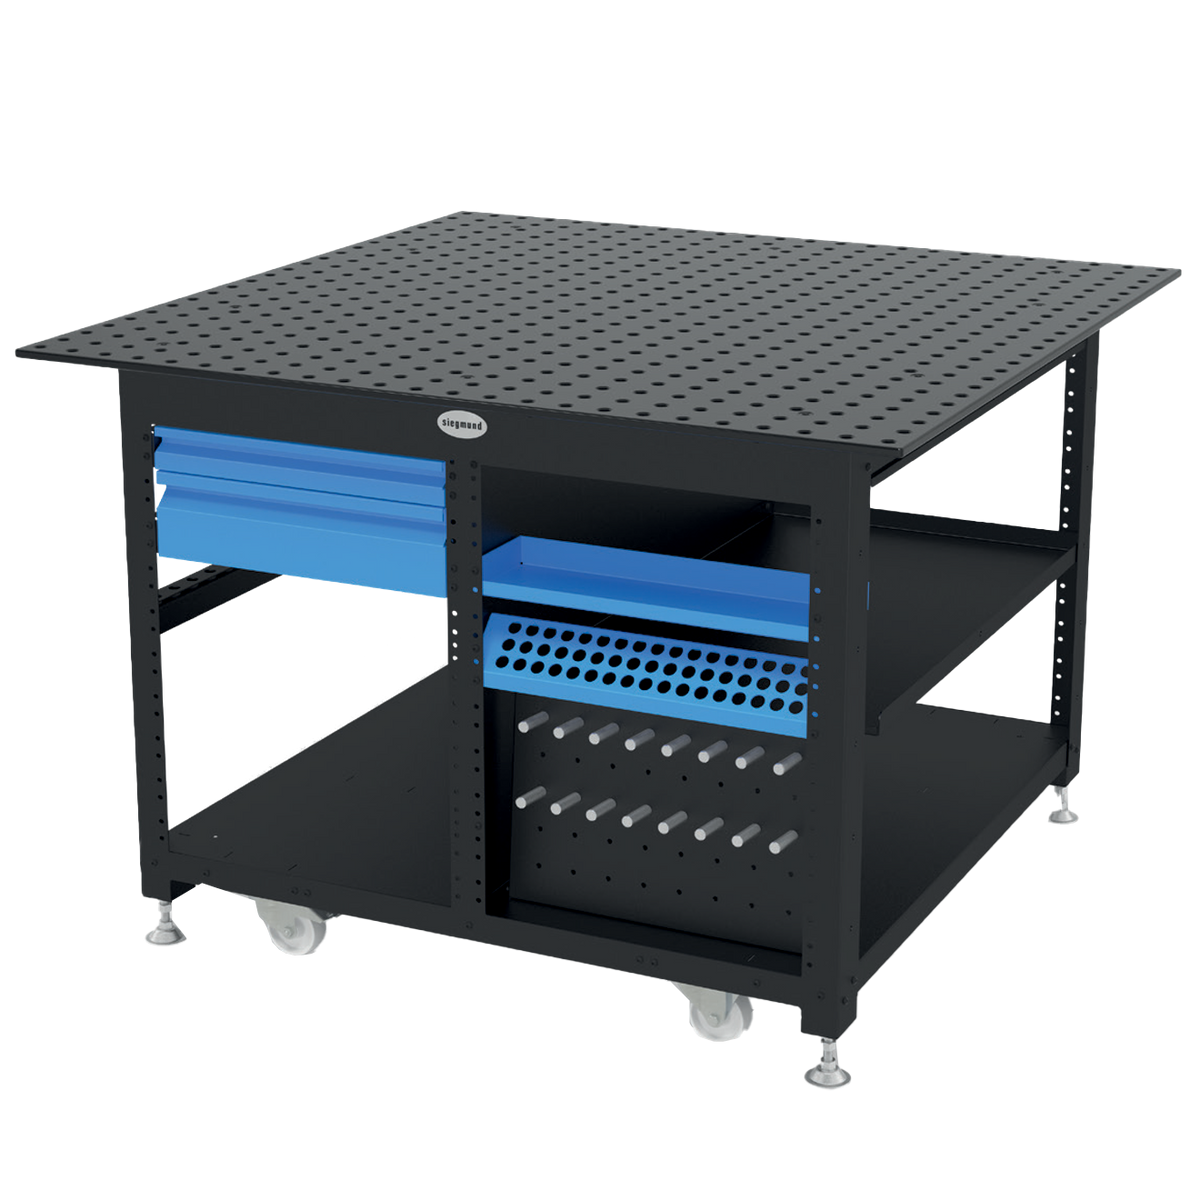 US164603: System 16 Workstation Including 4'x4' (48"x48") Perforated Plate & 2 Storage Drawers (Siegmund Imperial Series)